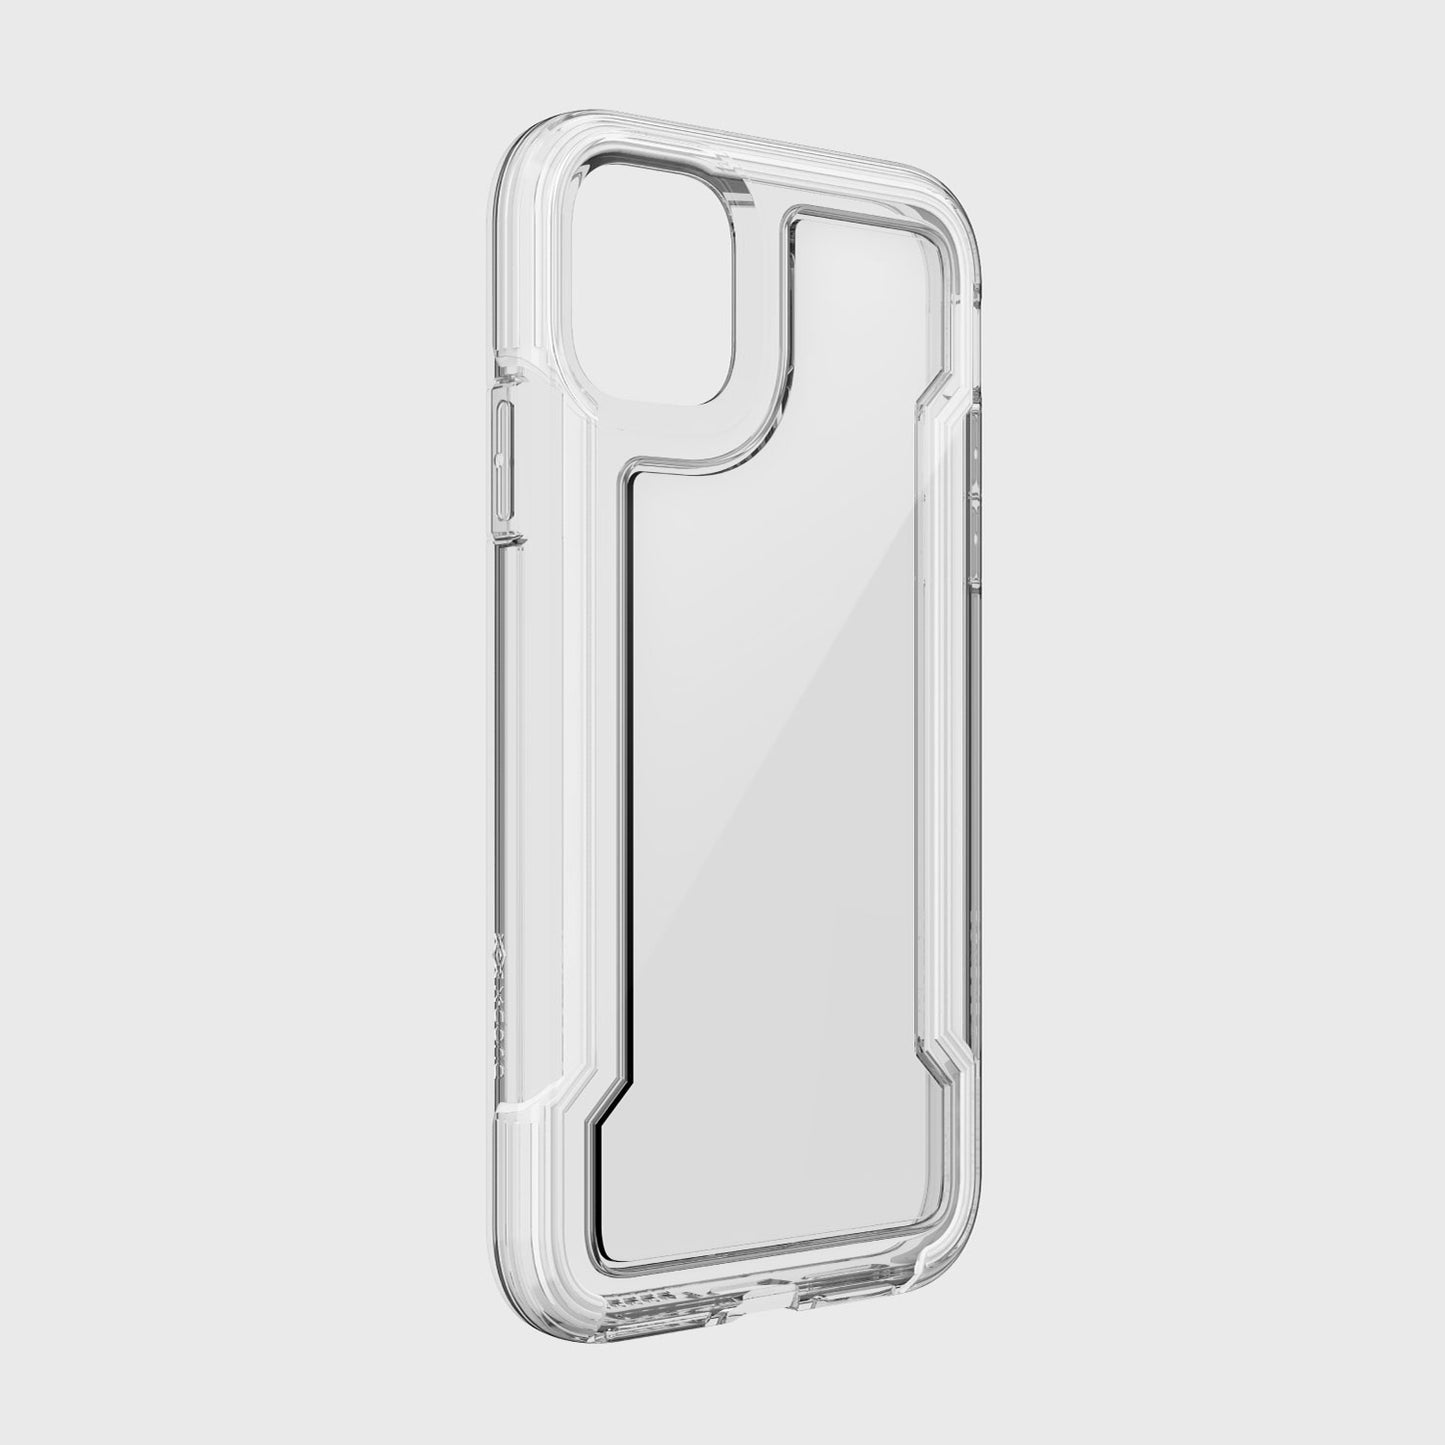 A Raptic CLEAR iPhone 11 Case providing 2-metre drop protection on a white background.